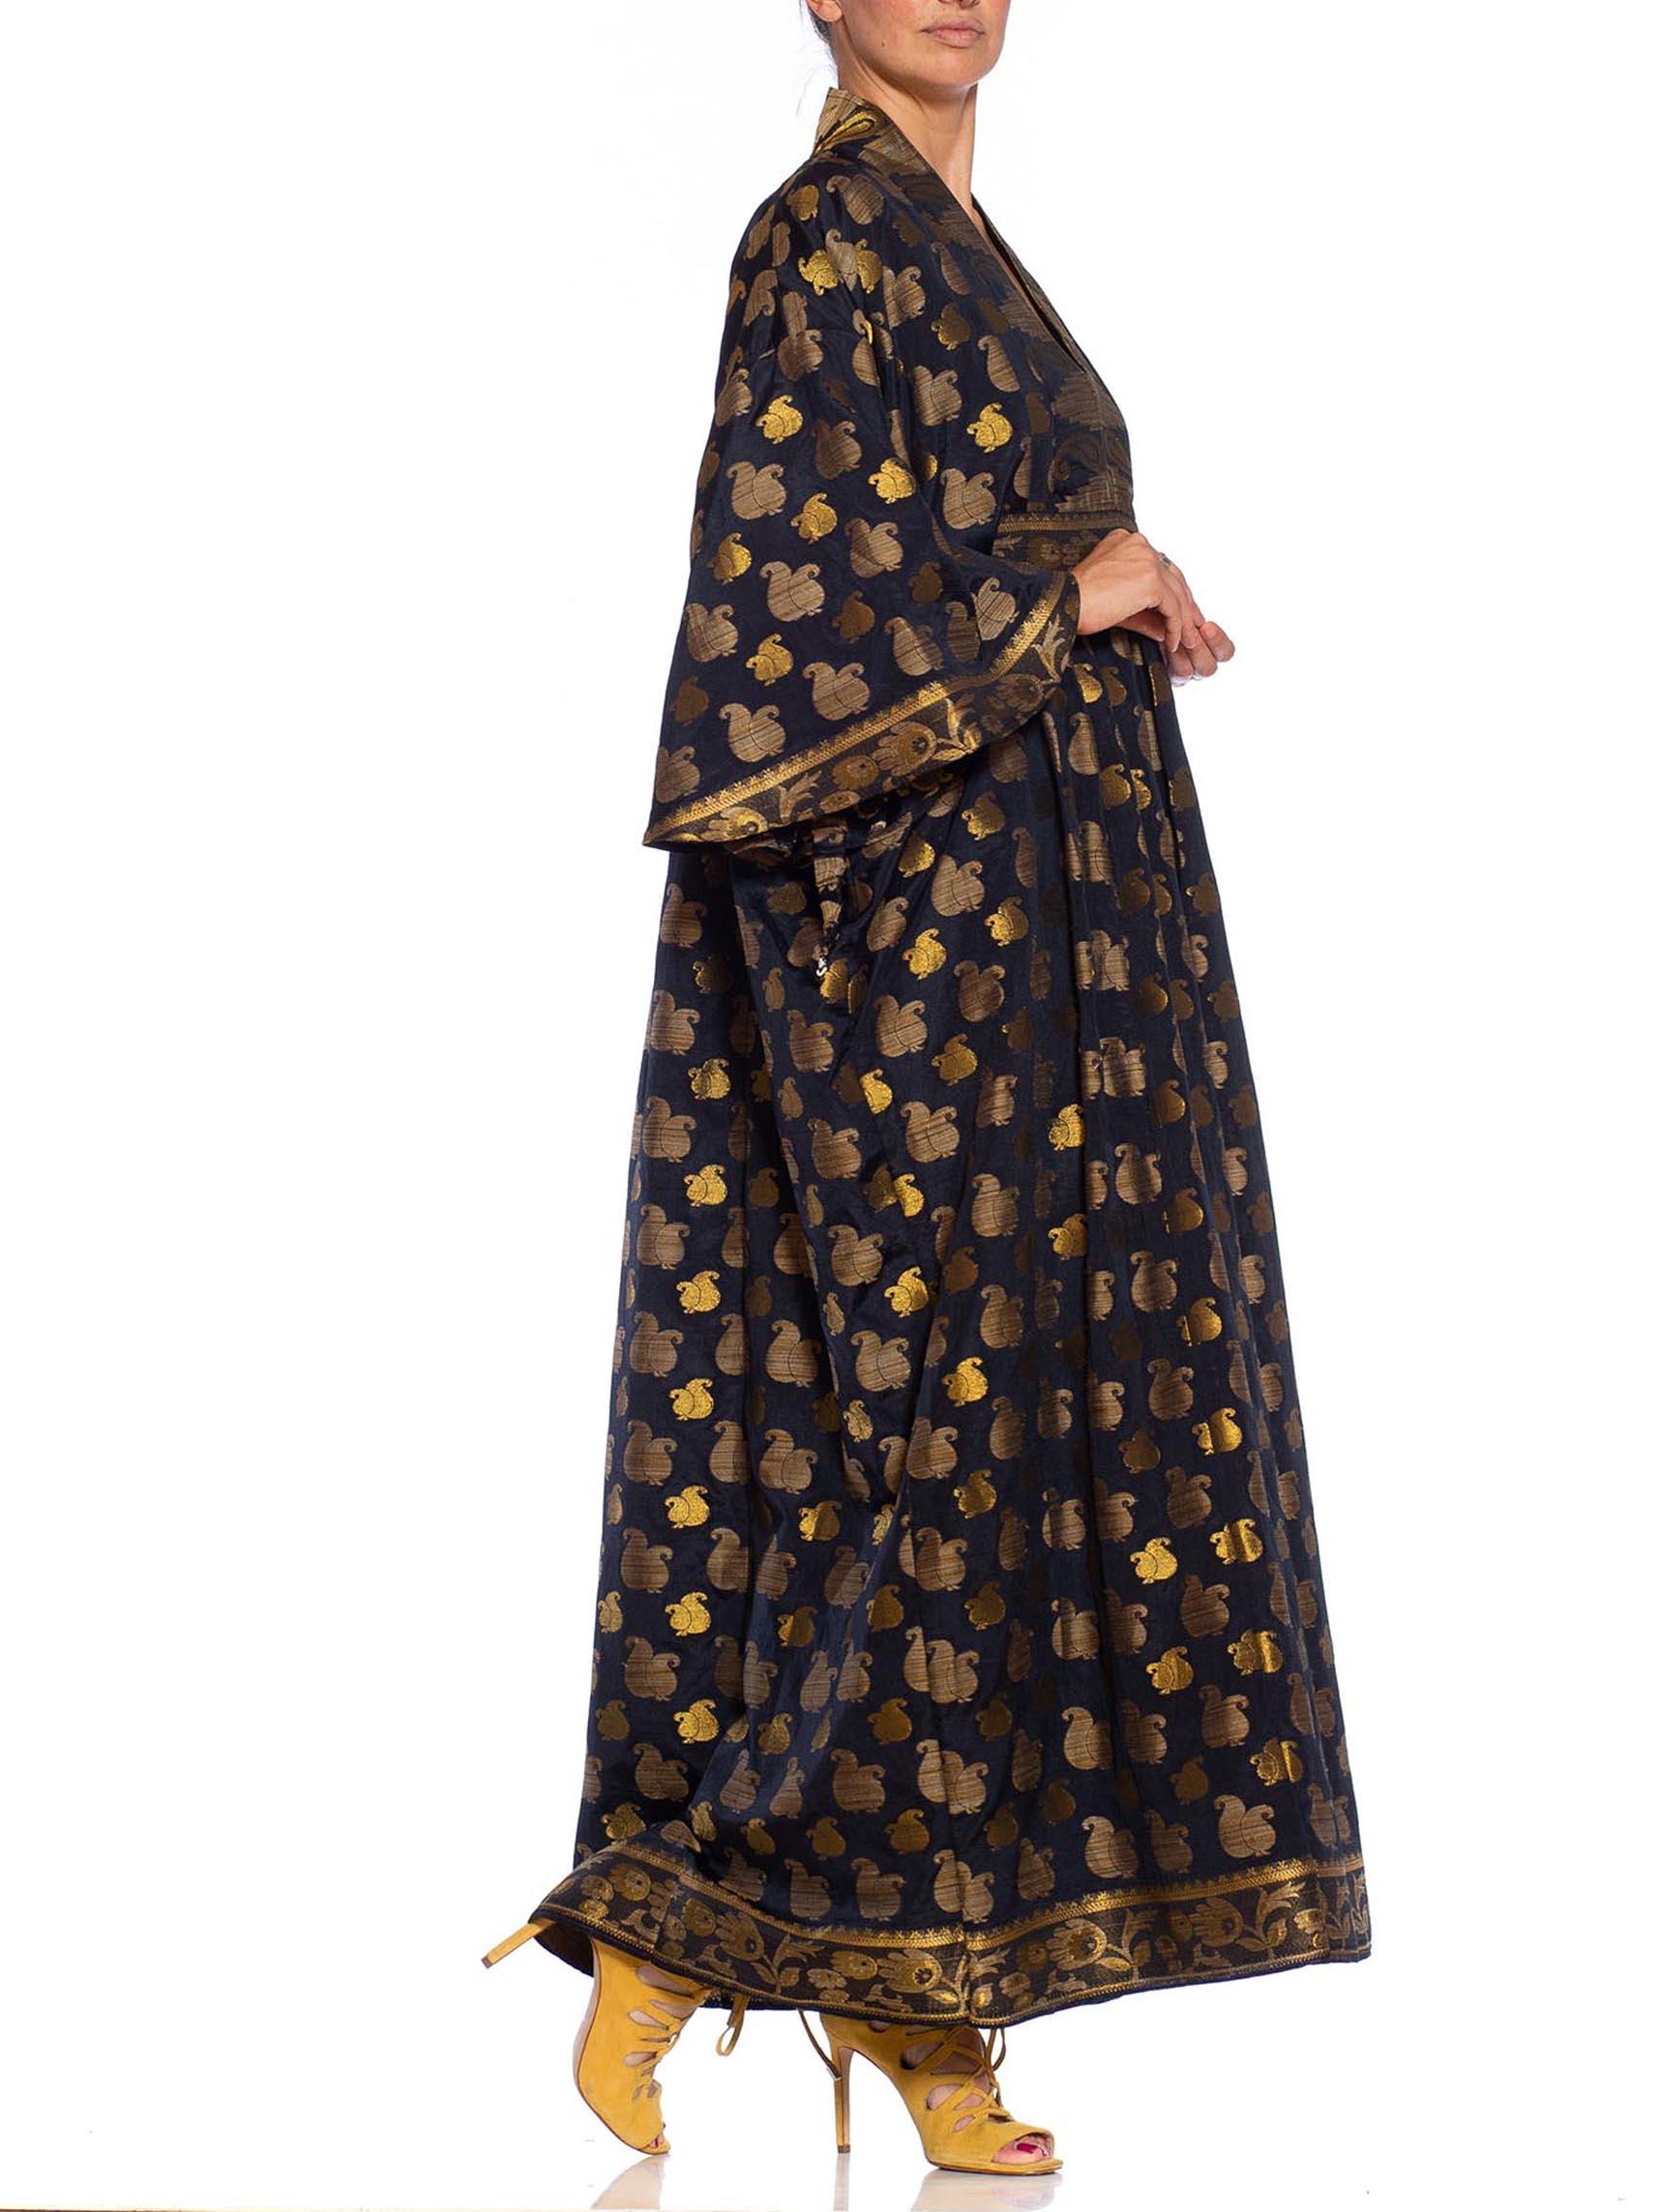 MORPHEW COLLECTION Black & Gold Metallic Silk Kaftan Made From Vintage Saris In Excellent Condition For Sale In New York, NY